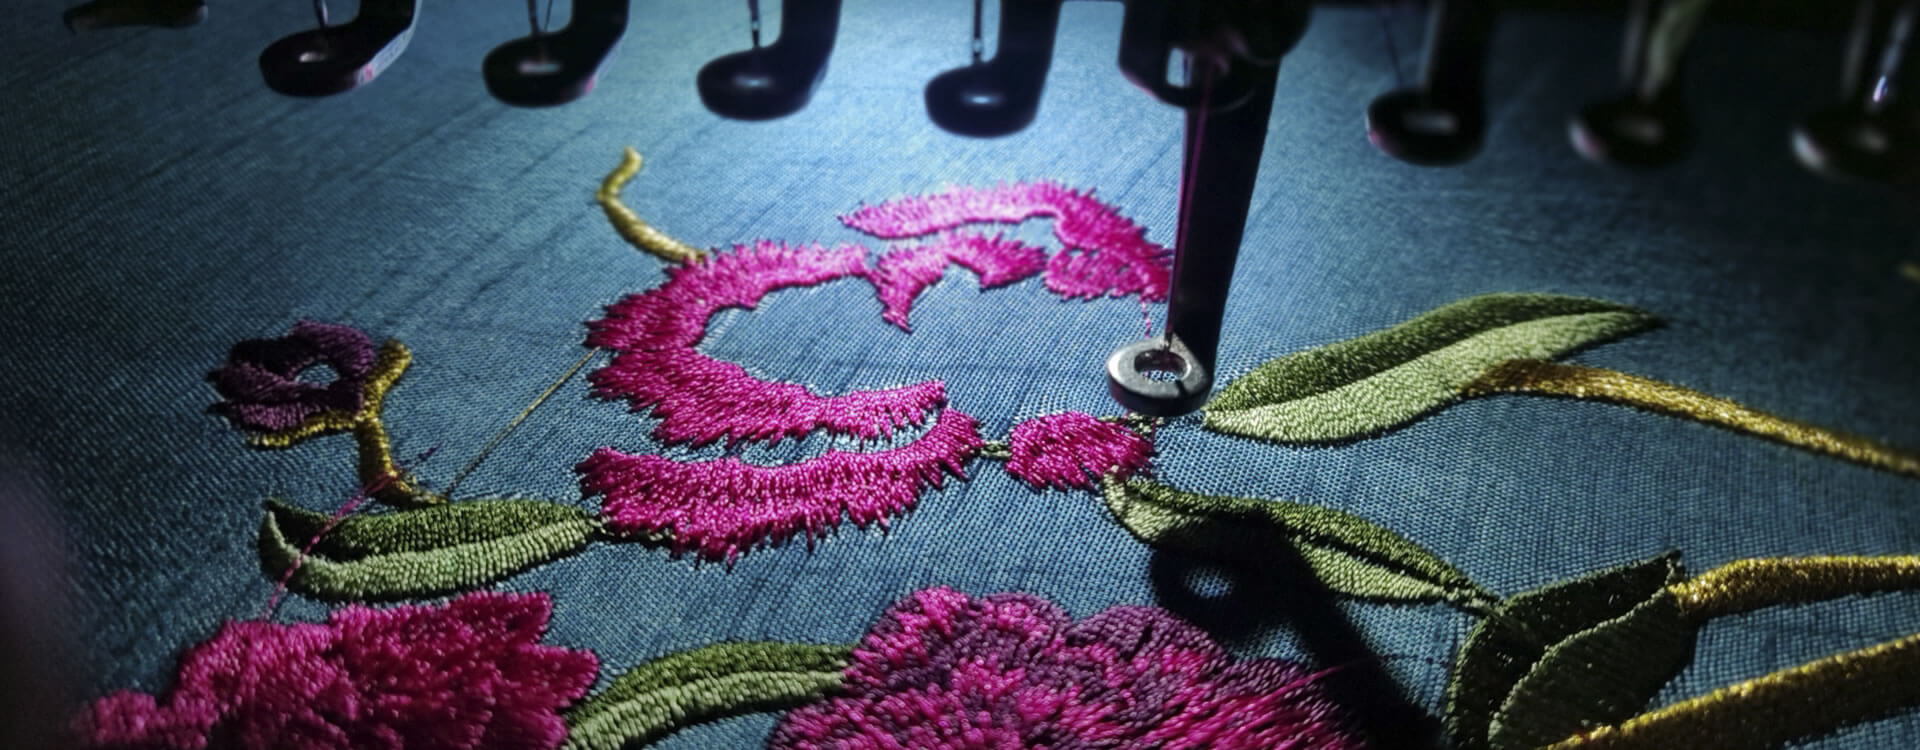 What is Embroidery & What to Do with Embroidery | TREASURIE